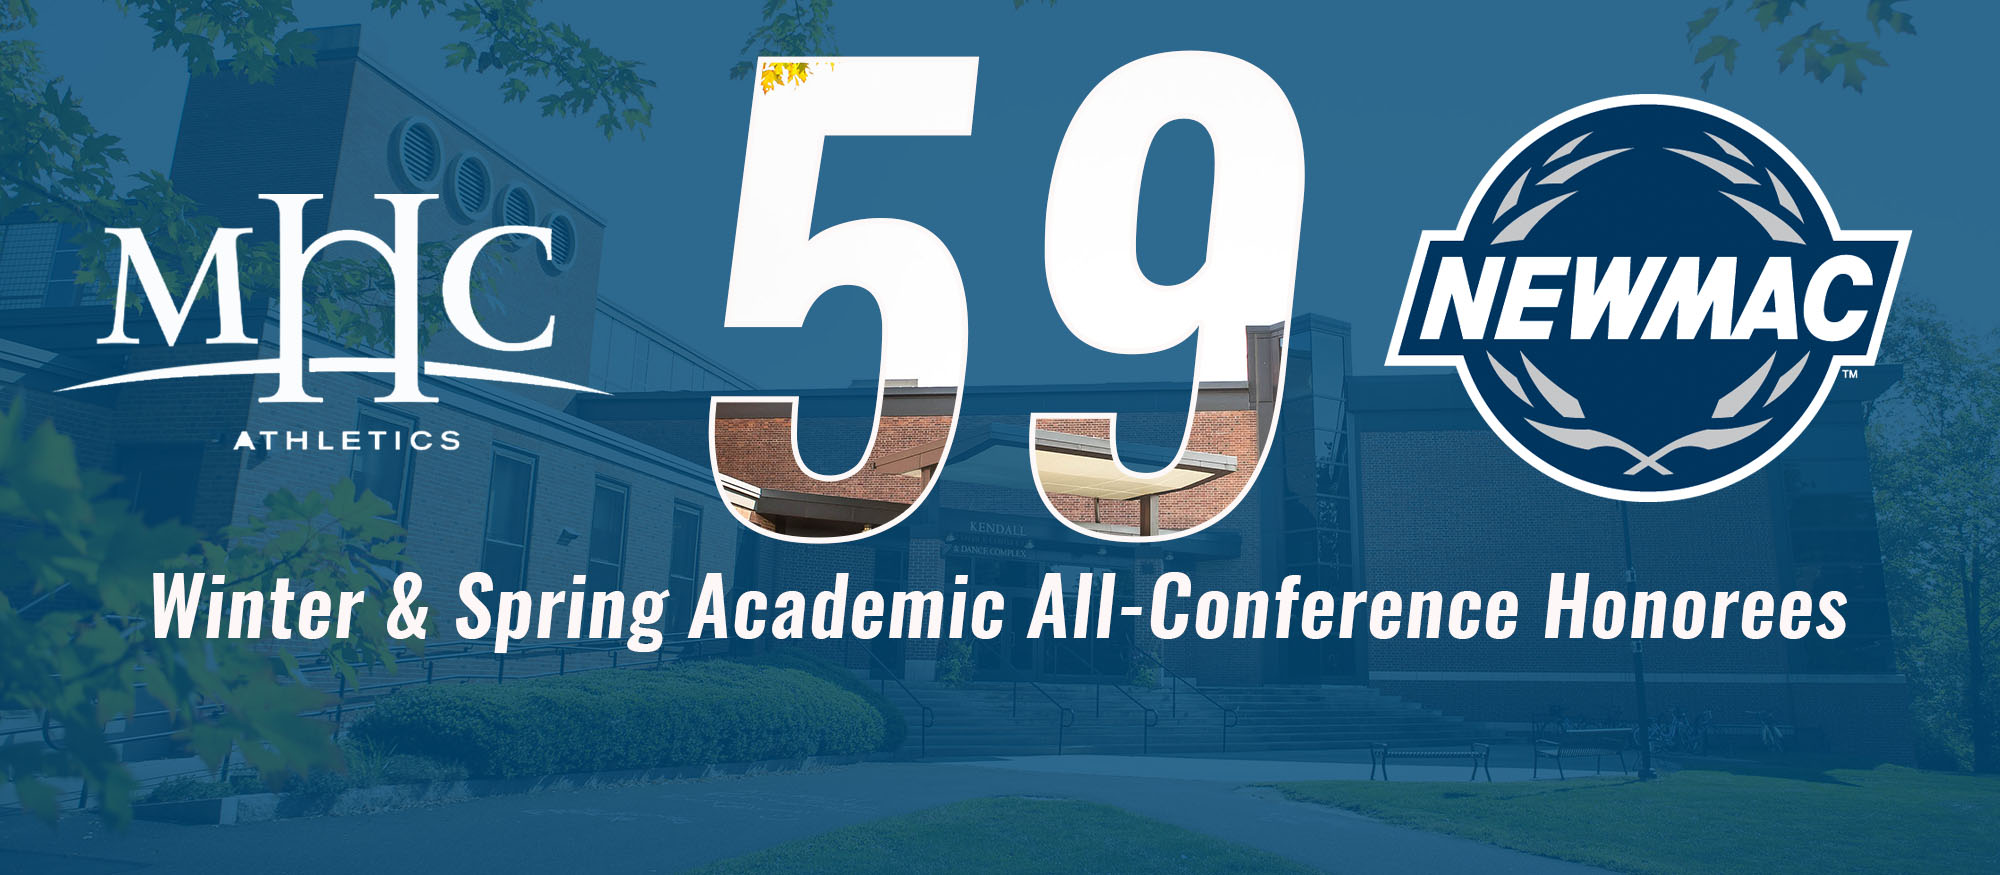 59 Winter and Spring Student-Athletes Earn NEWMAC Academic All-Conference Honors